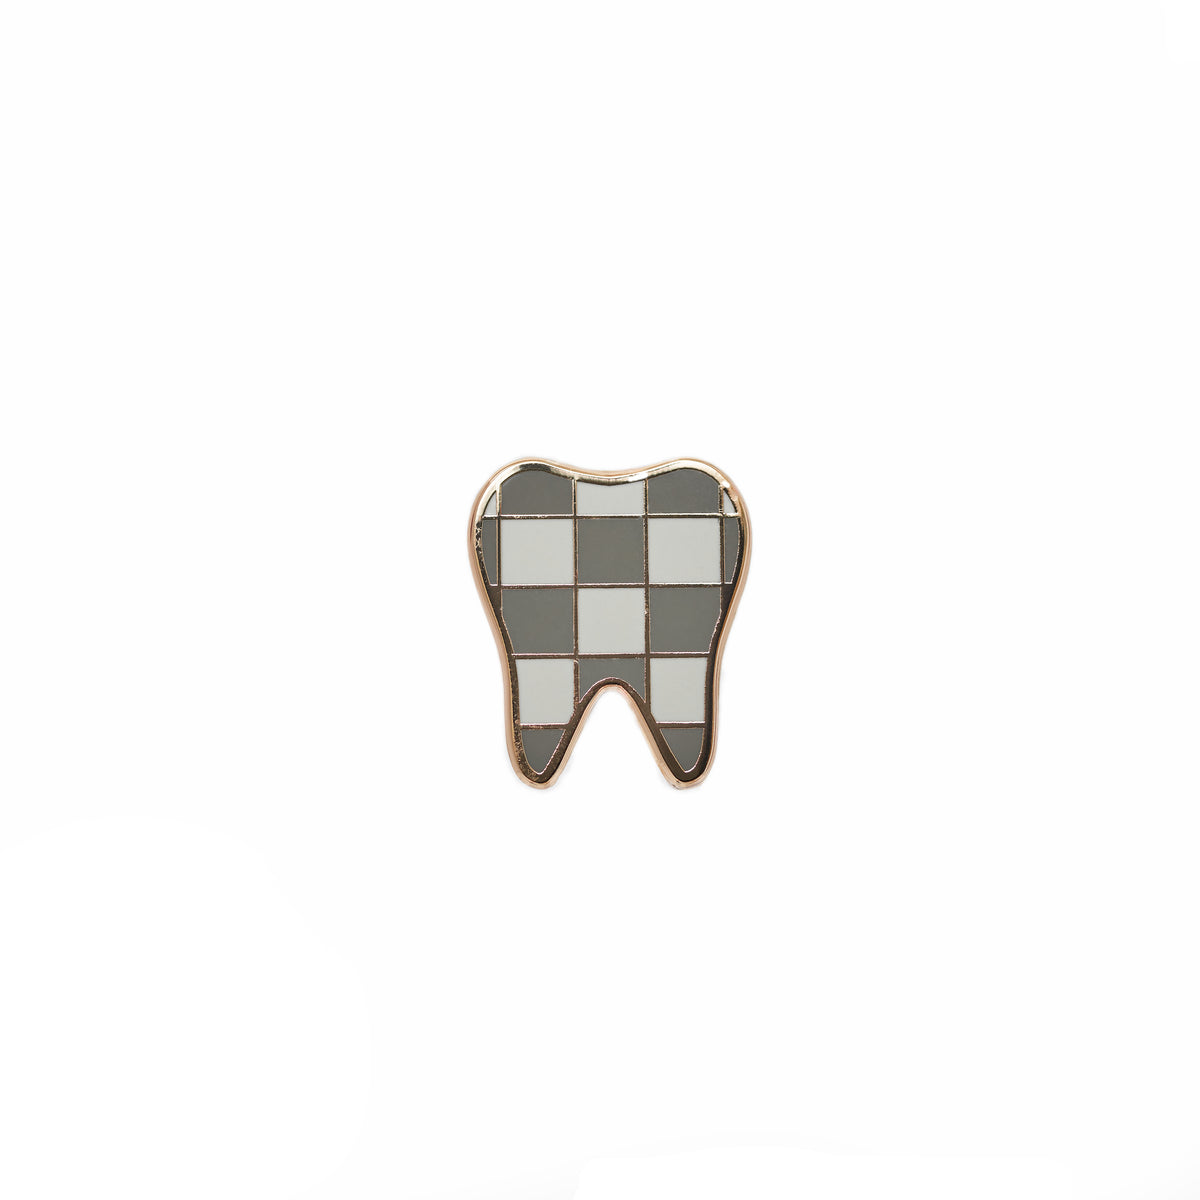 lovely32 Specialty Tooth Pin - Couture White Damier Print Gold Plating